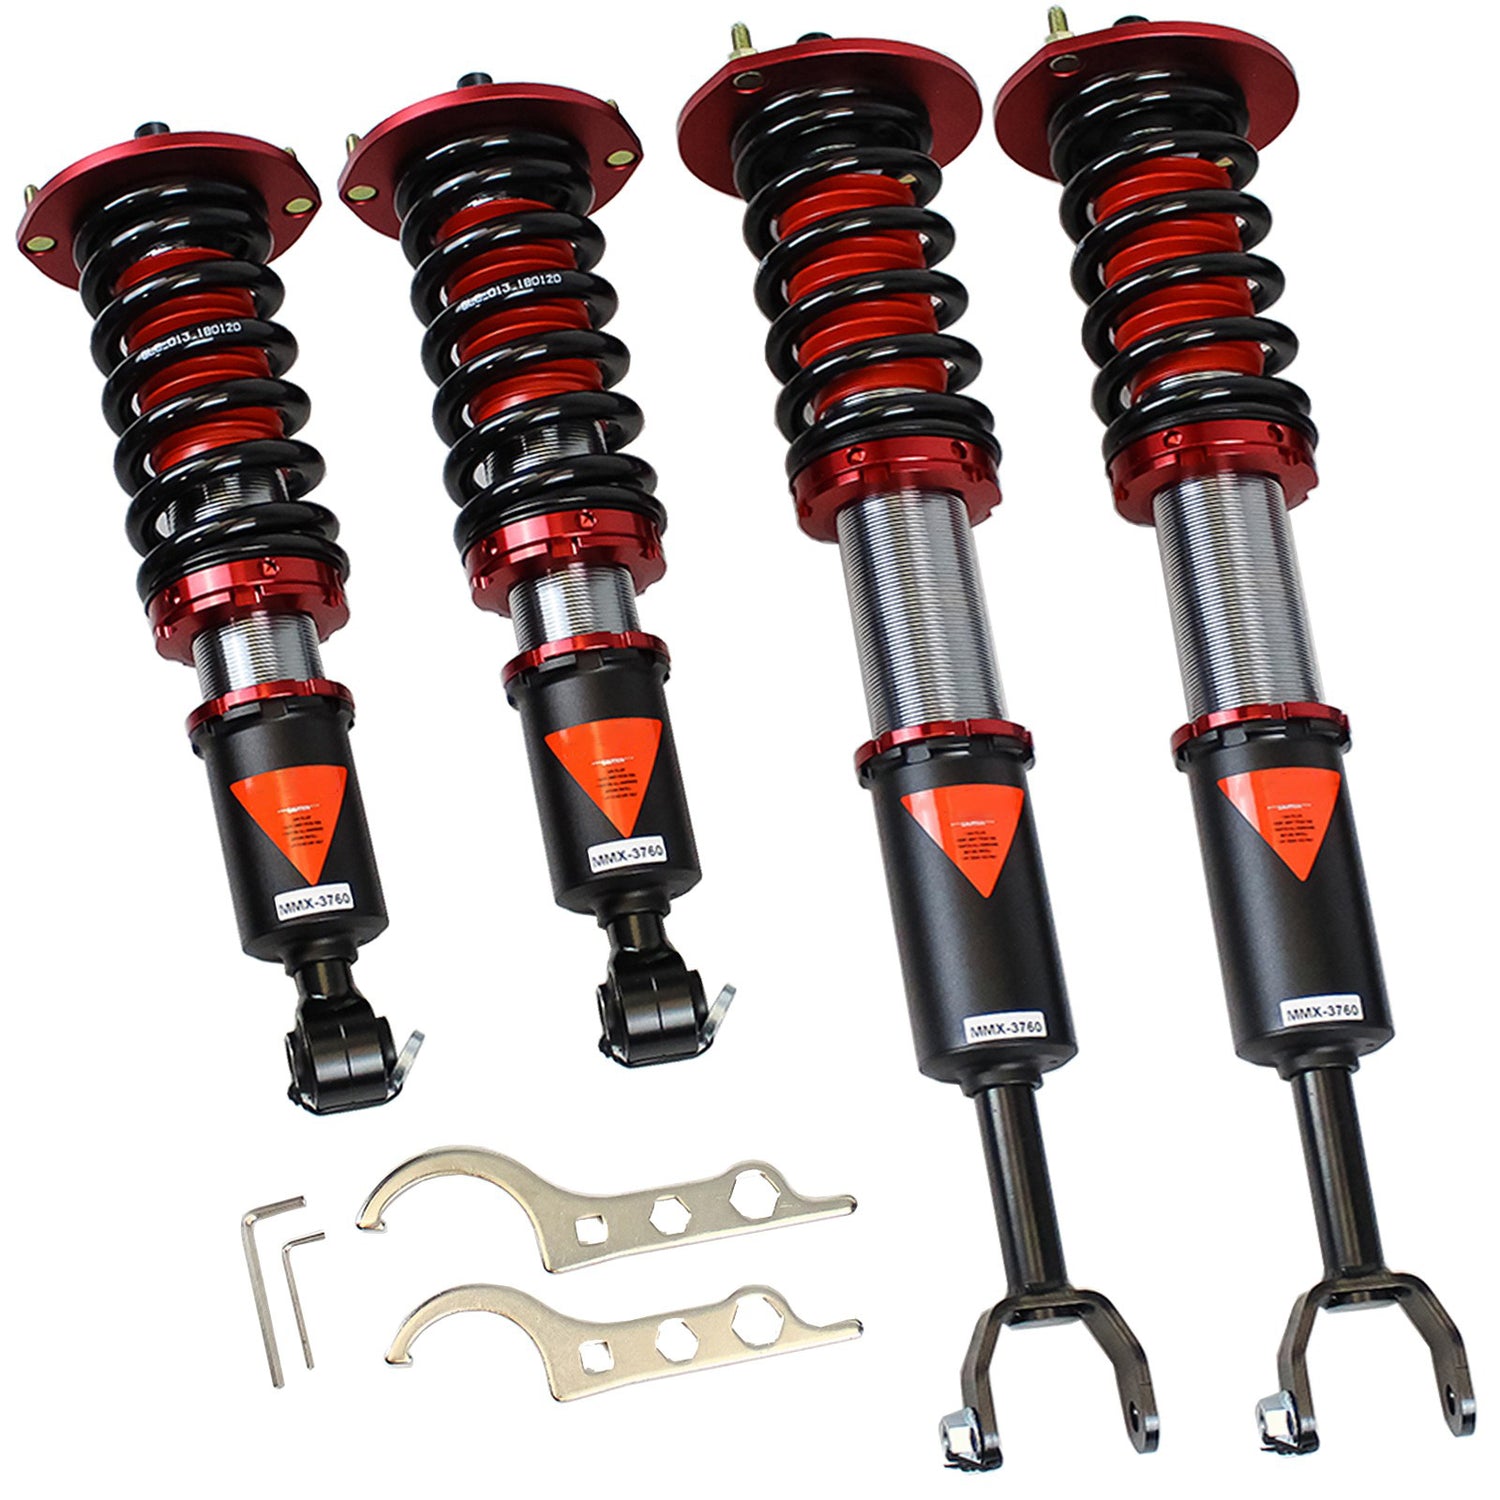 MMX3760 MAXX Coilovers Lowering Kit, Fully Adjustable, Ride Height, 40 Clicks Rebound Settings, Nissan Skyline GT-T/GT-S R34(ER34/HR34) 99-02